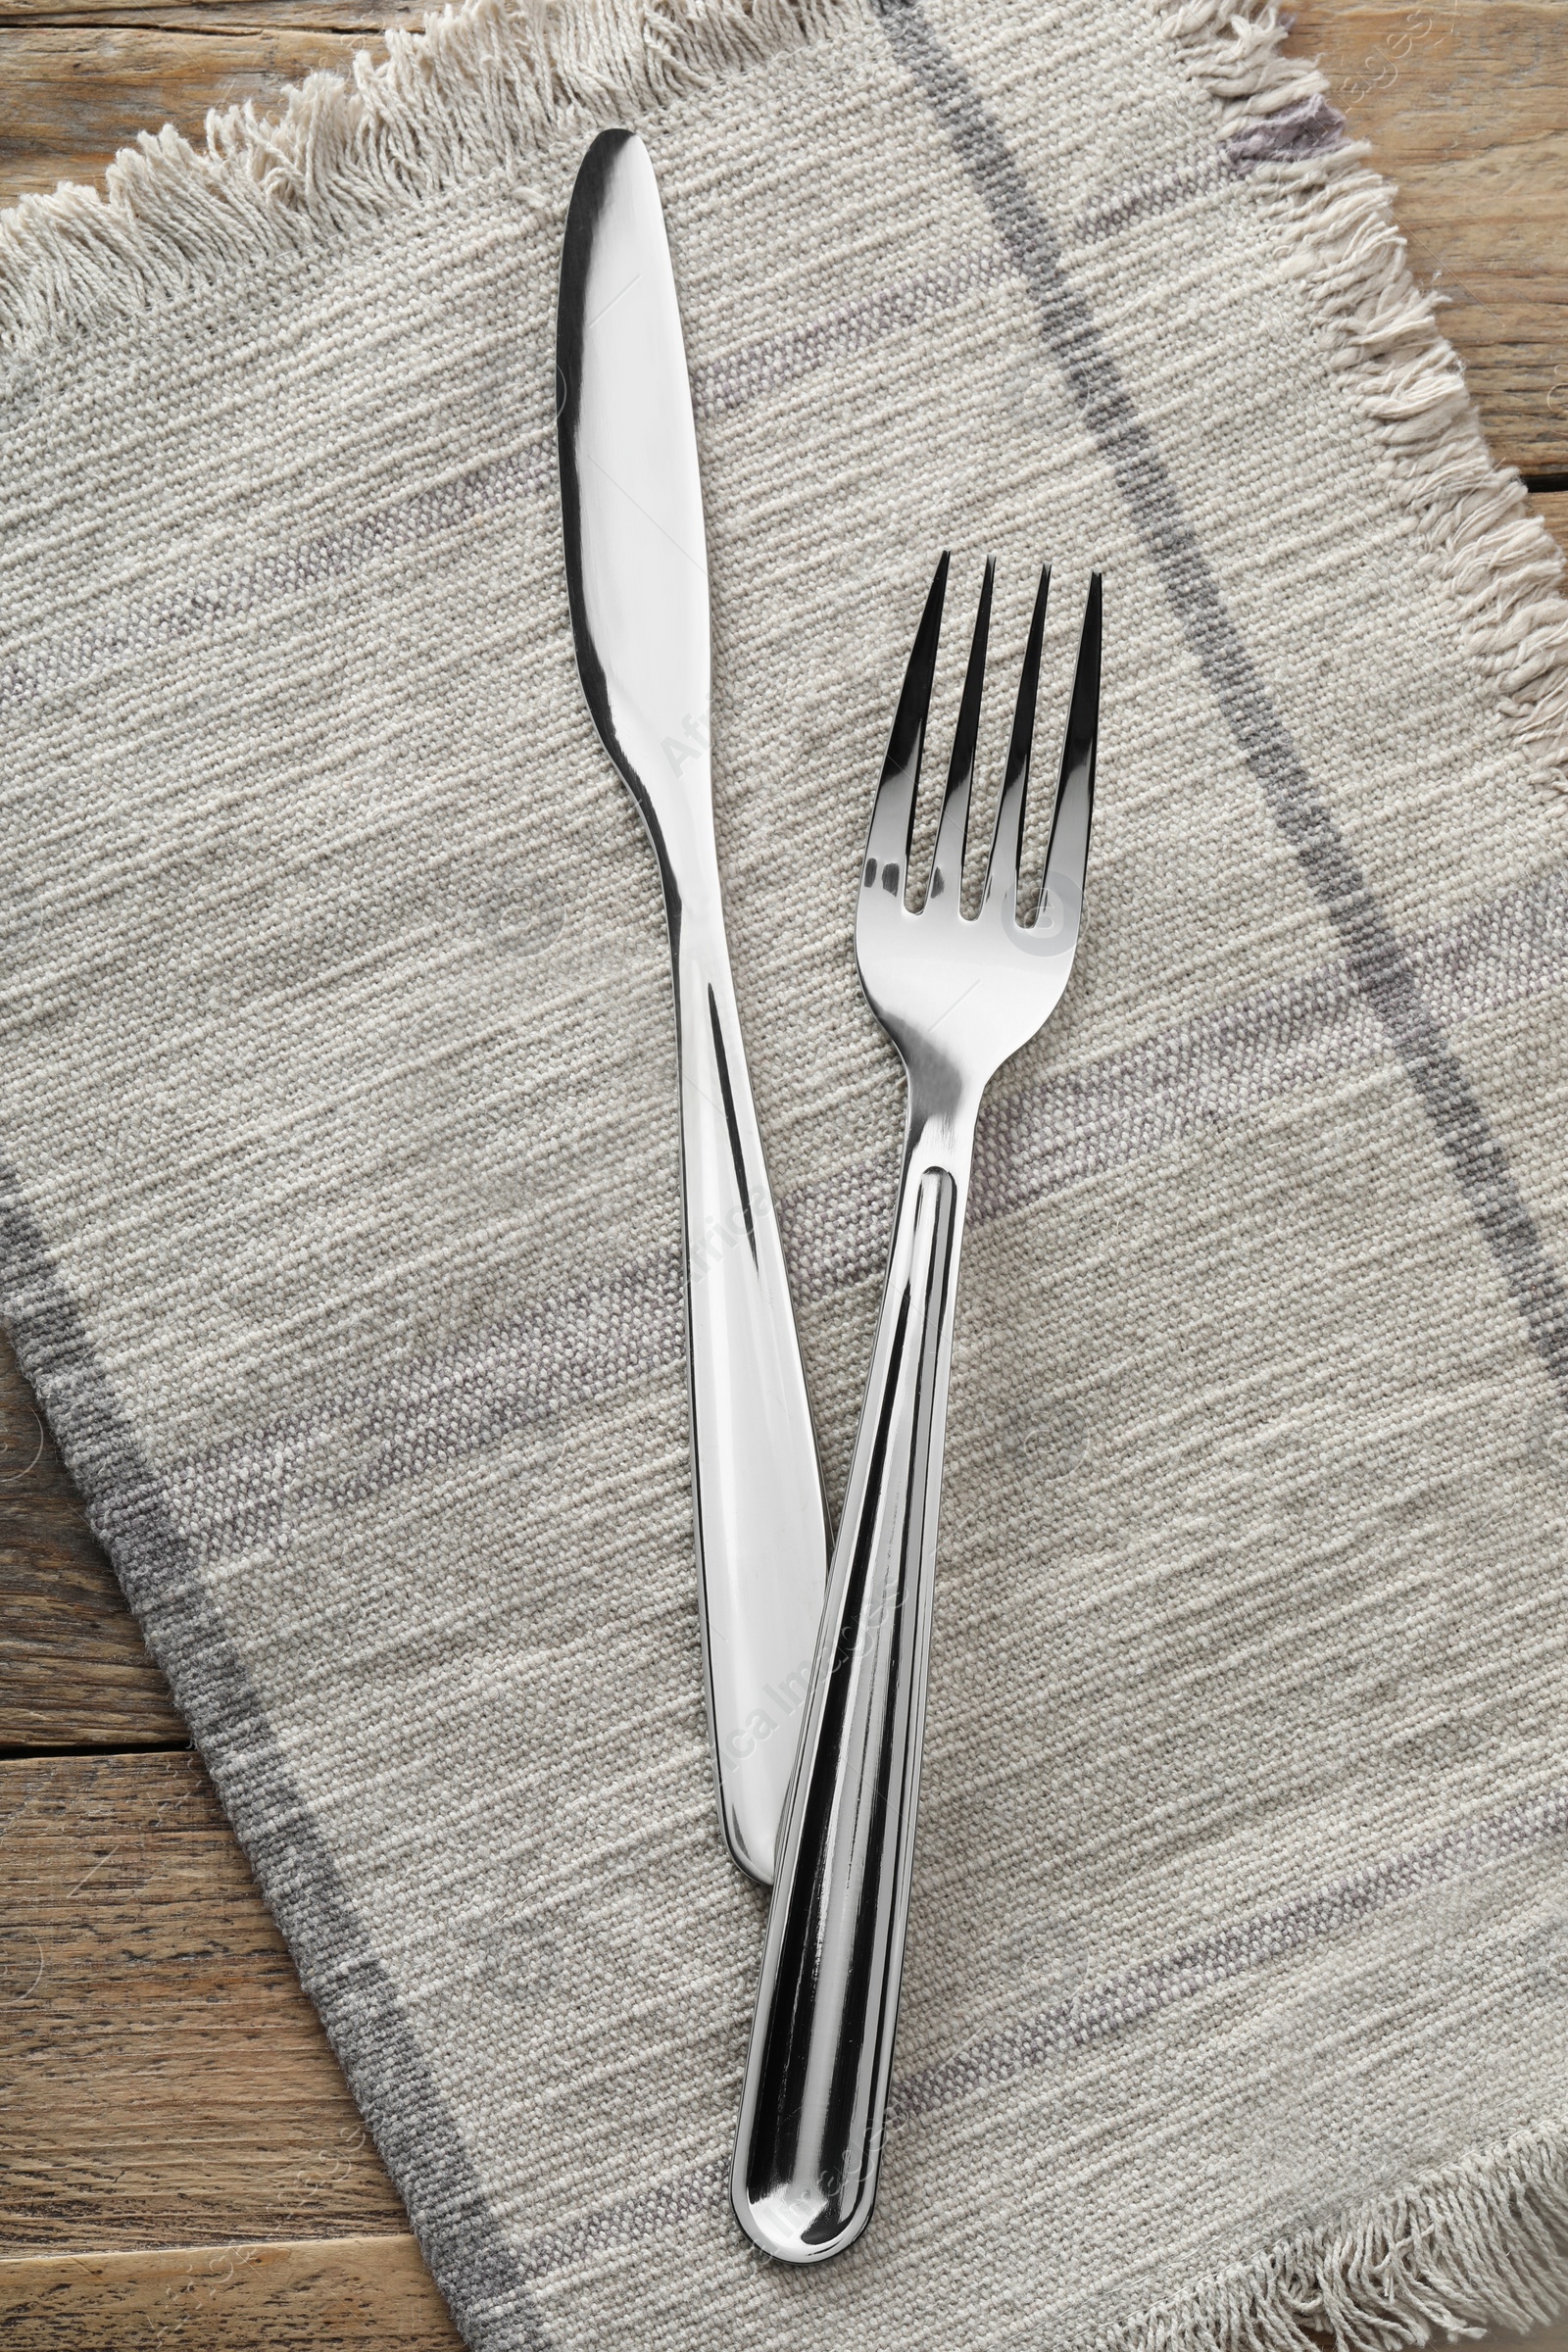 Photo of Fork, knife and napkin on wooden table, top view. Stylish shiny cutlery set